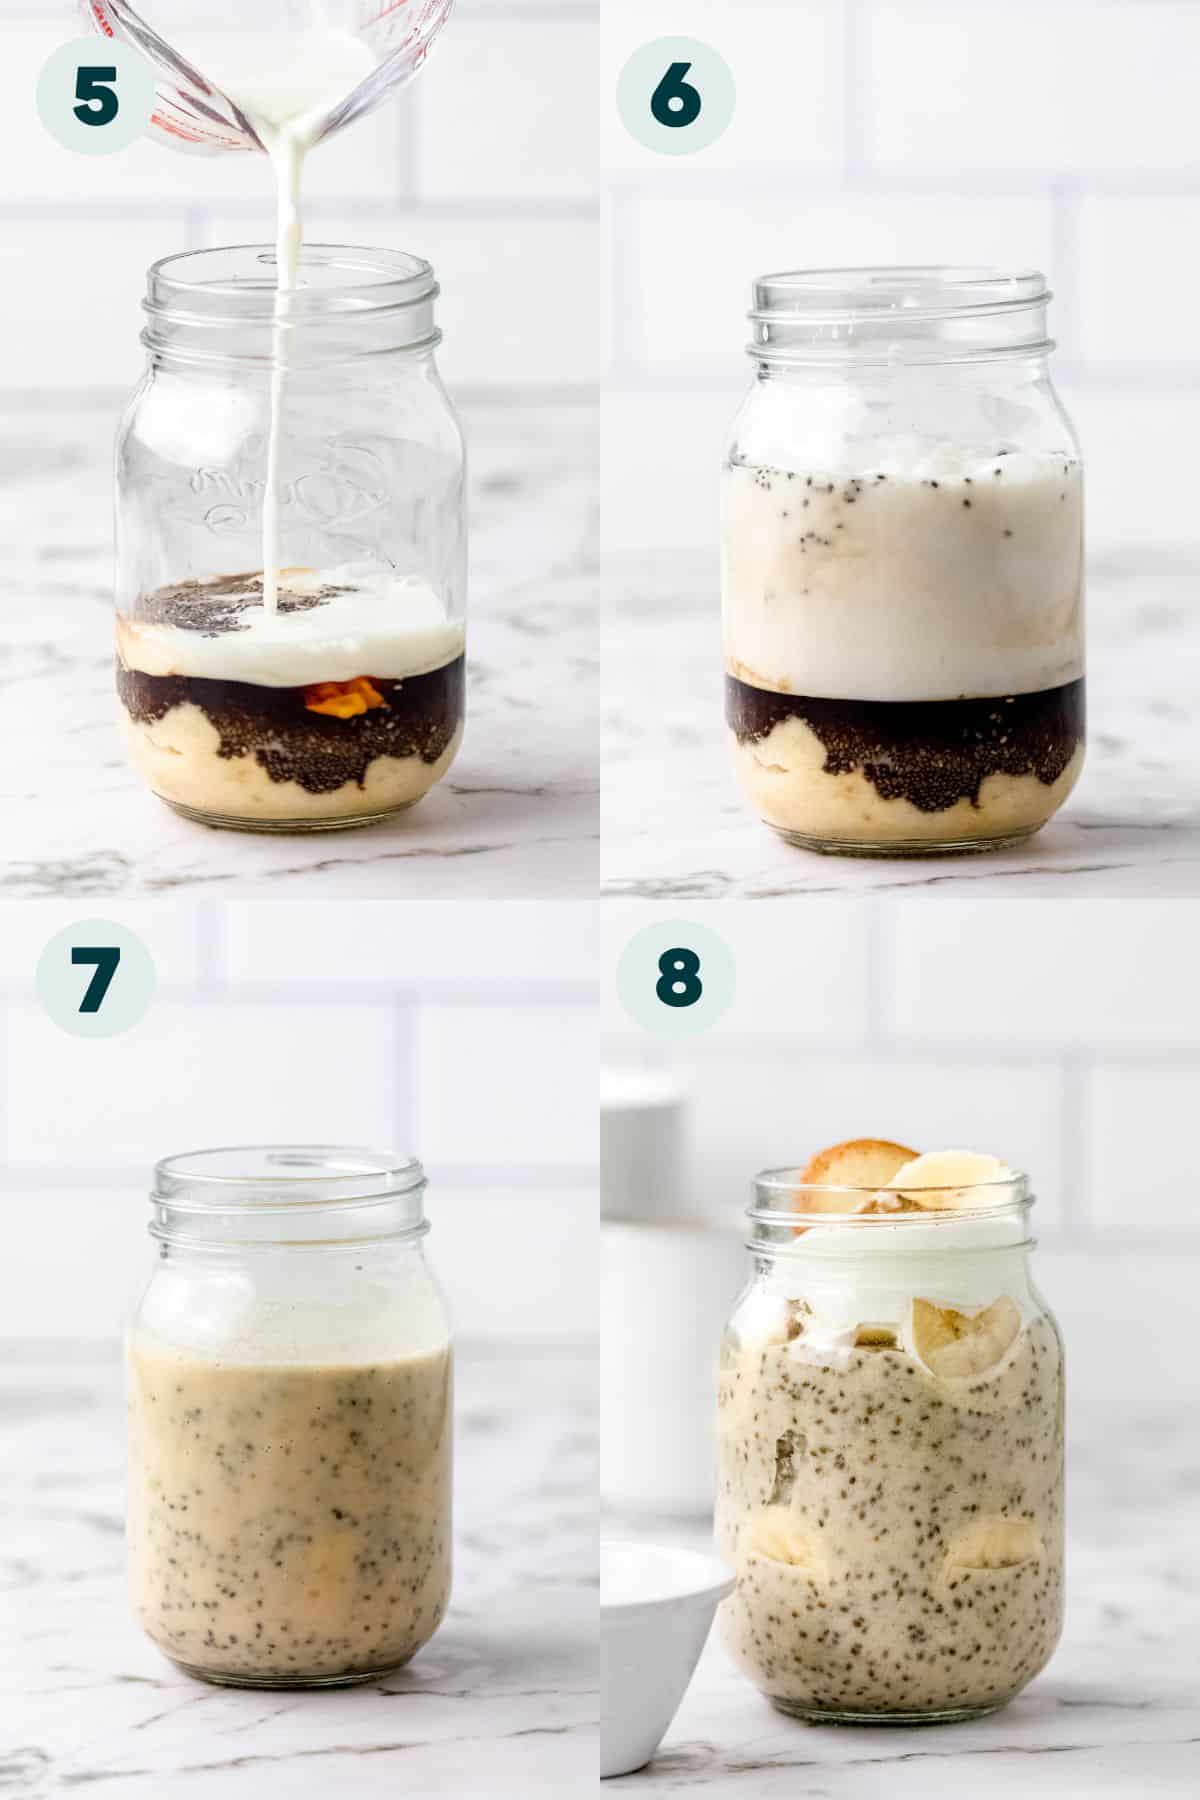 Step by step photos showing adding banana pudding ingredients to the jar.